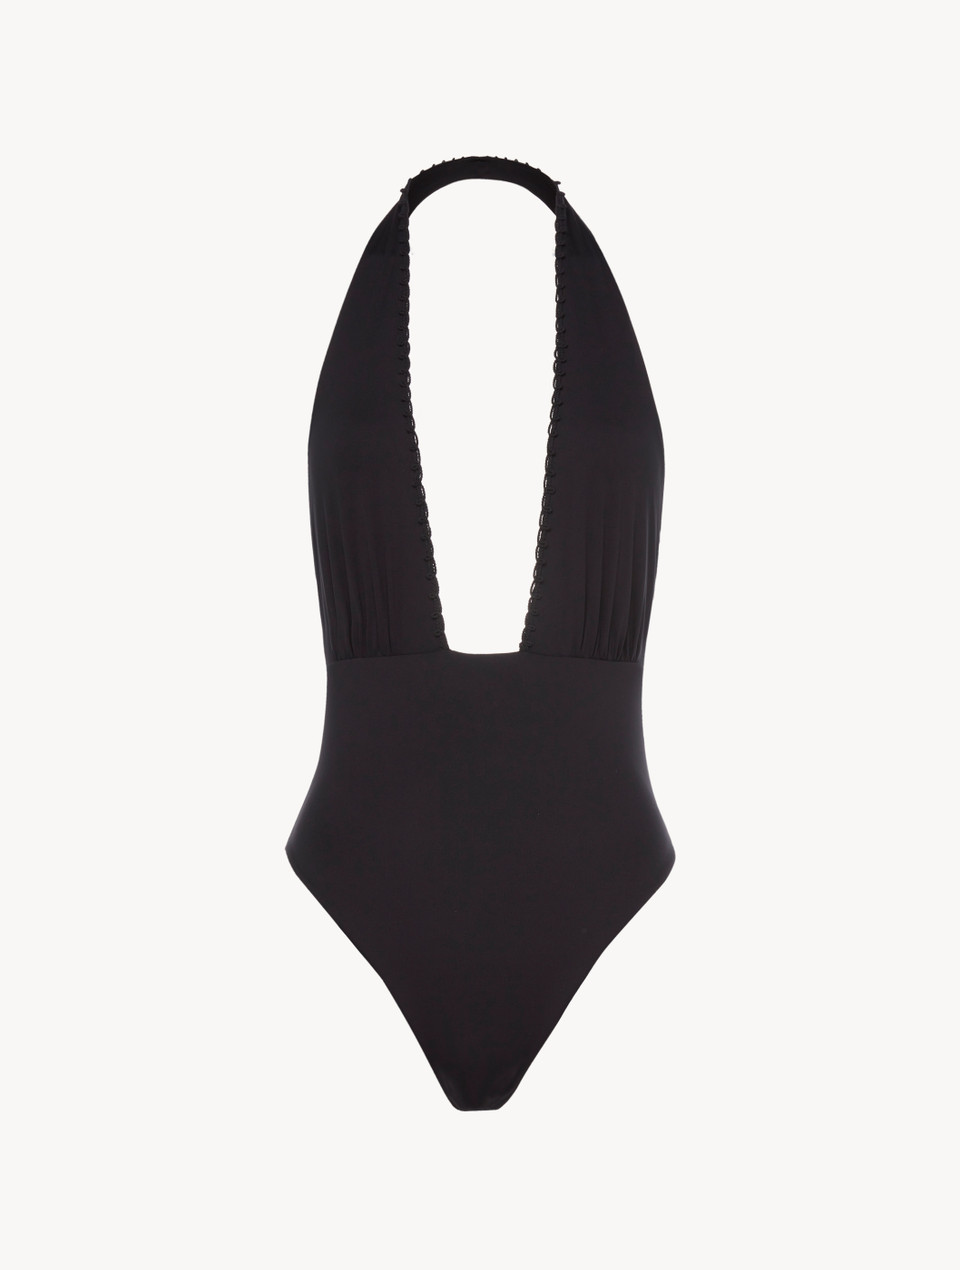 Bodysuit in Black Lycra with embroidered tulle - La Perla - US